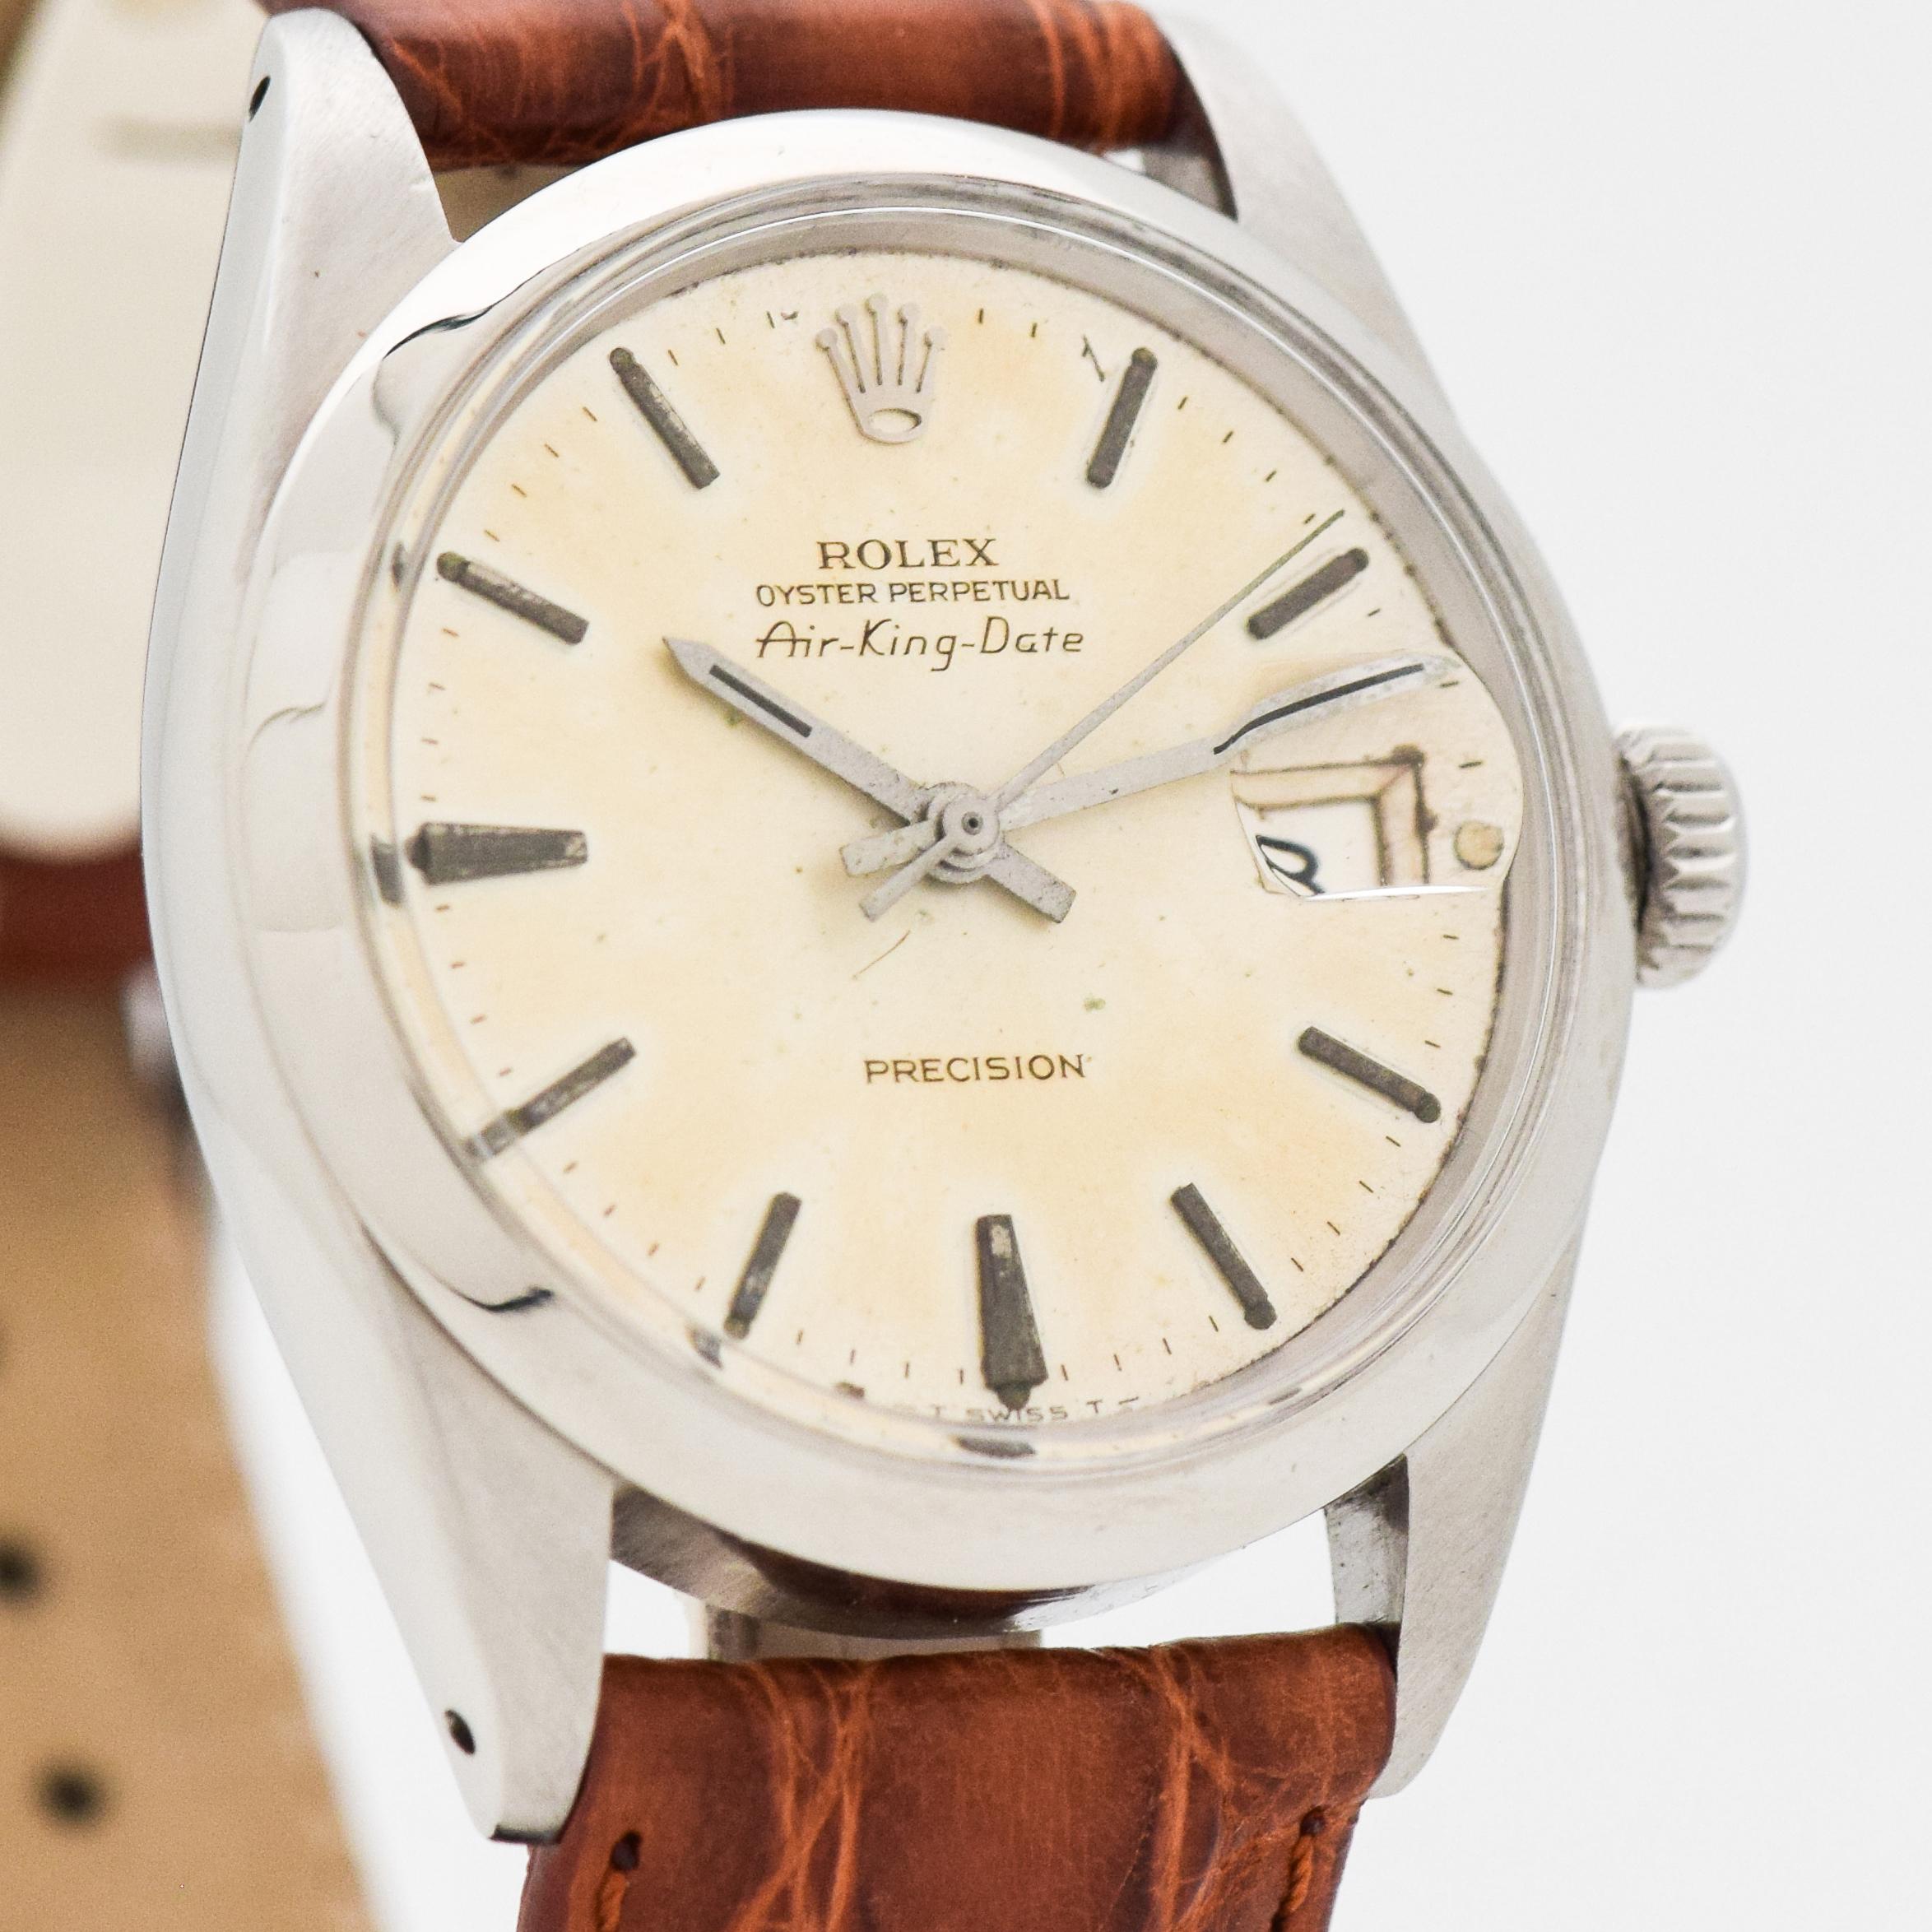 1968 Vintage Rolex Air-King Date Ref. 5700 Stainless Steel watch with Original Silver Dial with Applied Steel Stick/Bar/Baton Markers. 34mm x 40mm lug to lug (1.34 in. x 1.57 in.) - 26 jewel, automatic caliber movement. Triple Signed.